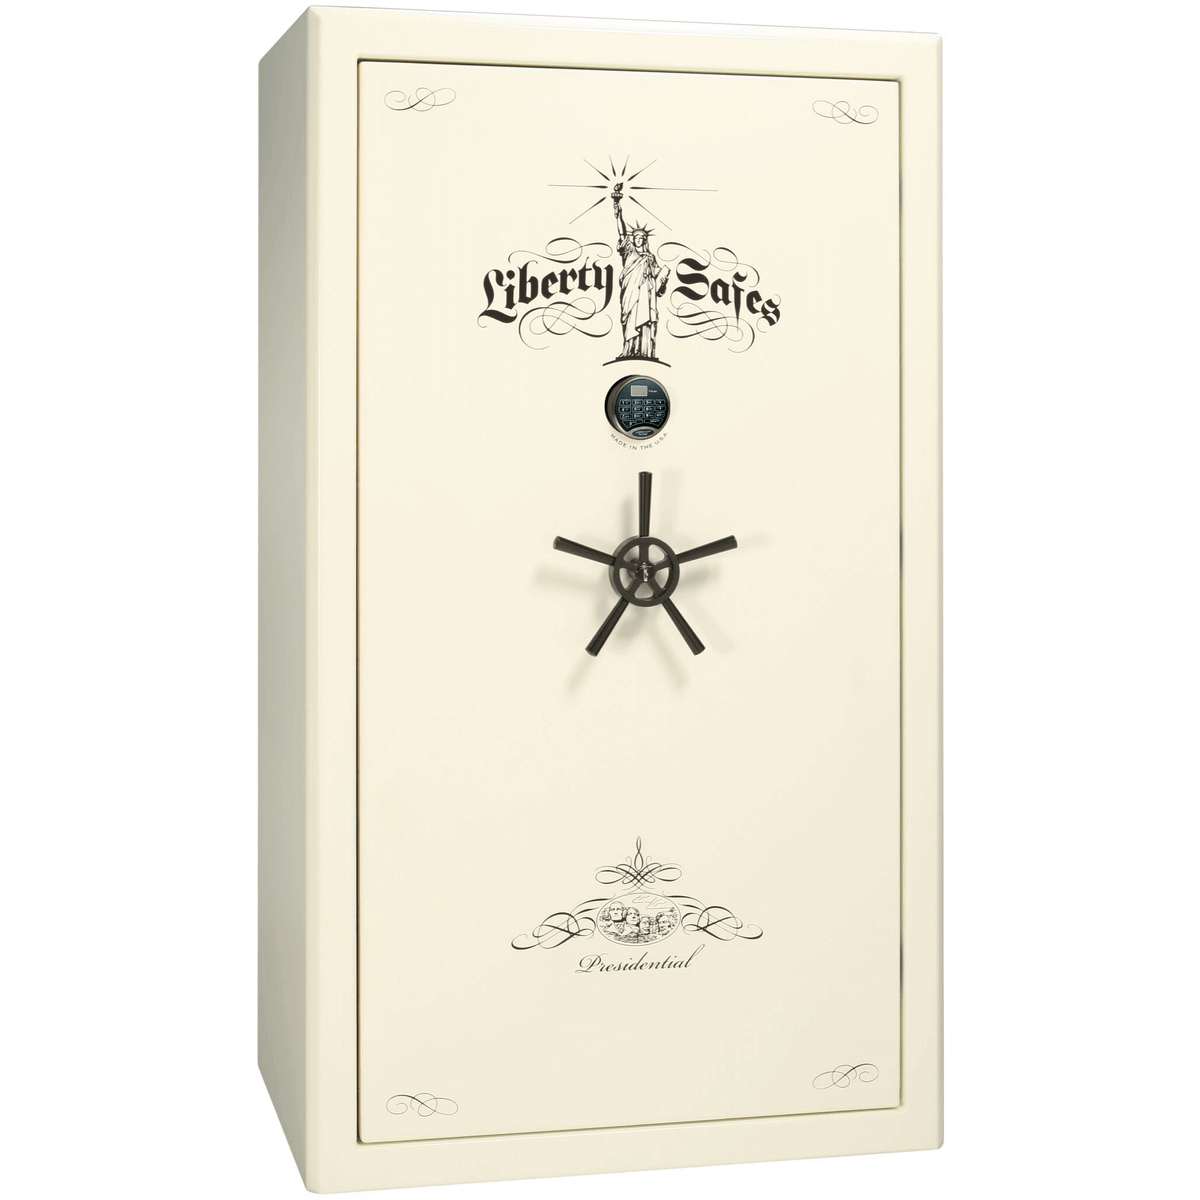 Liberty Safe Presidential 50 in White Marble with Black Chrome Electronic Lock, closed door.